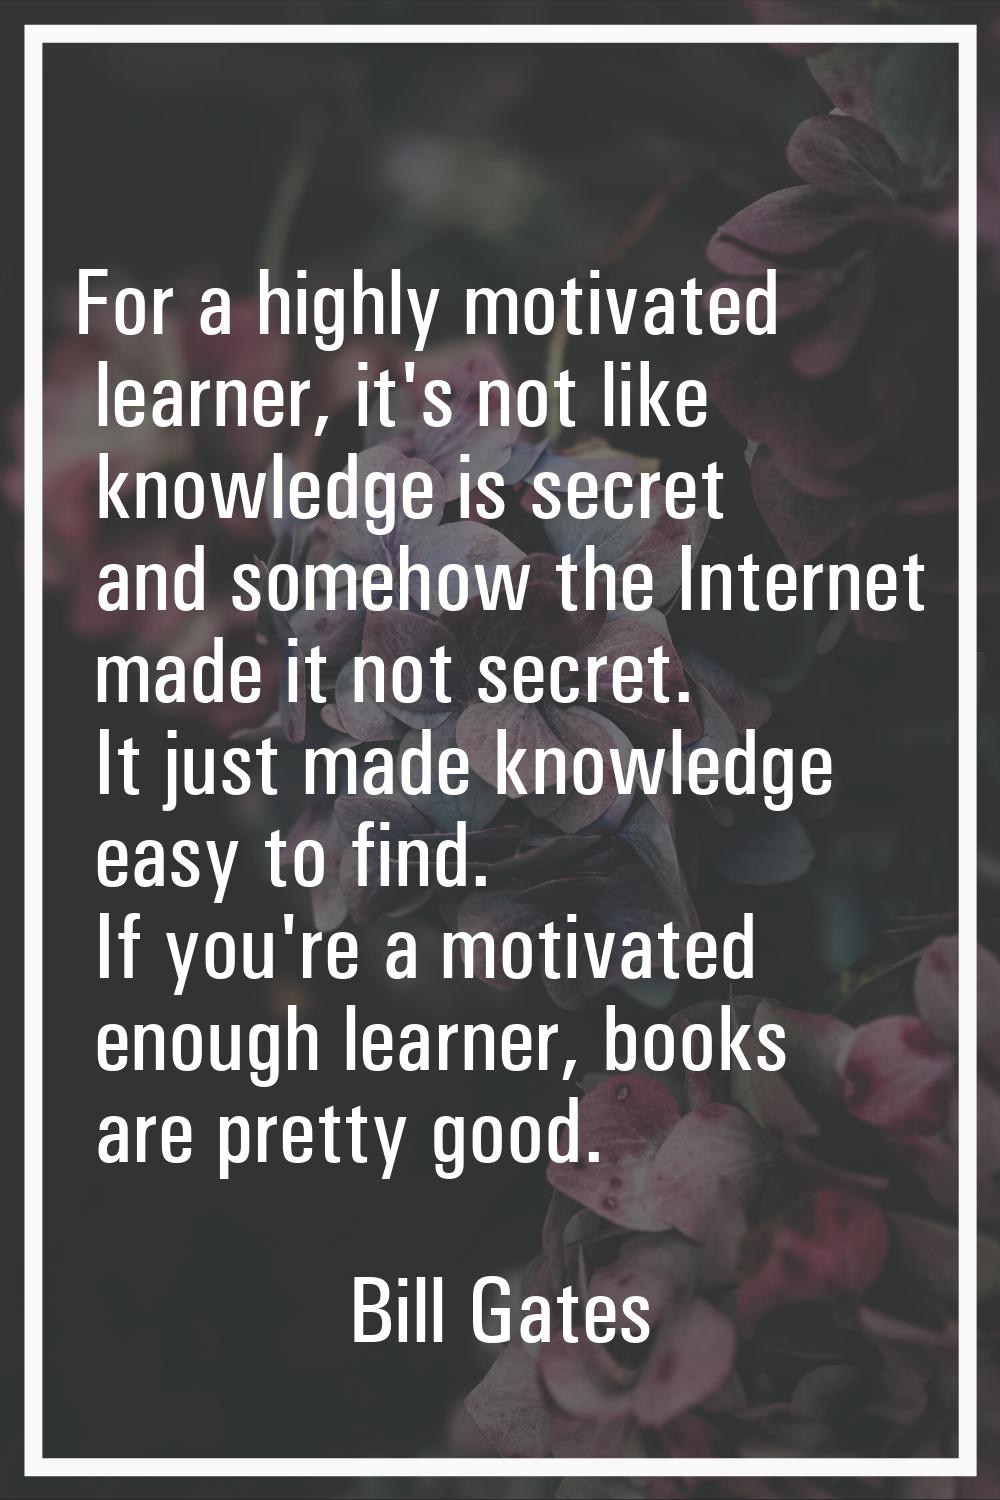 For a highly motivated learner, it's not like knowledge is secret and somehow the Internet made it 